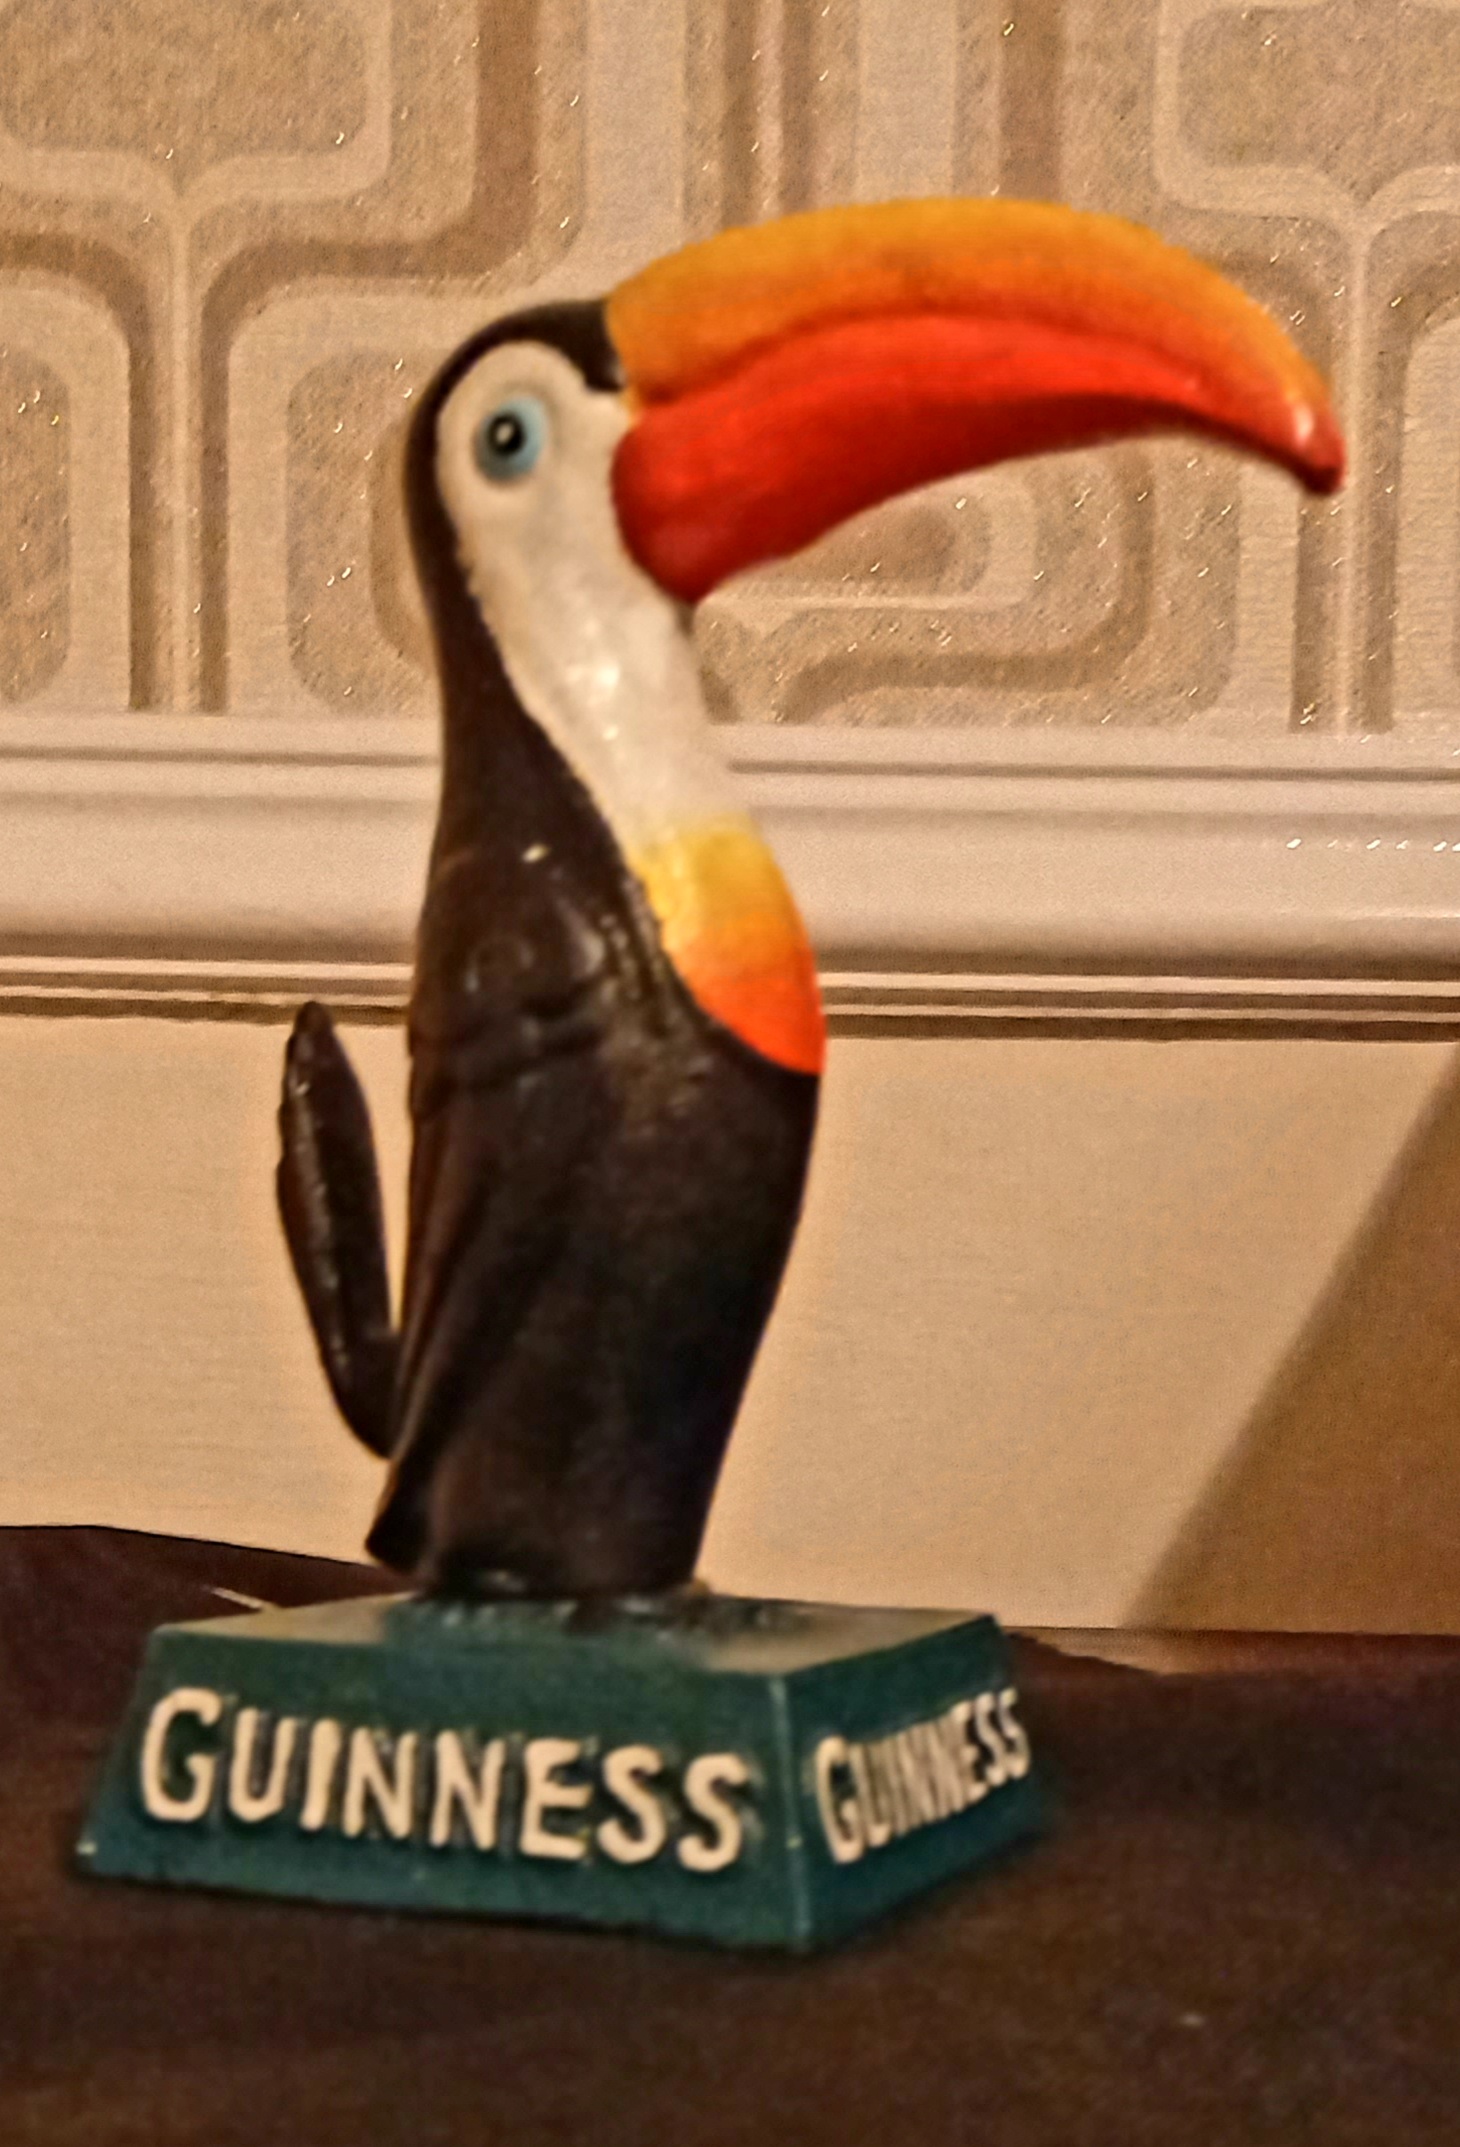 Cast Iron 'My Guinness' Advertising Toucan.